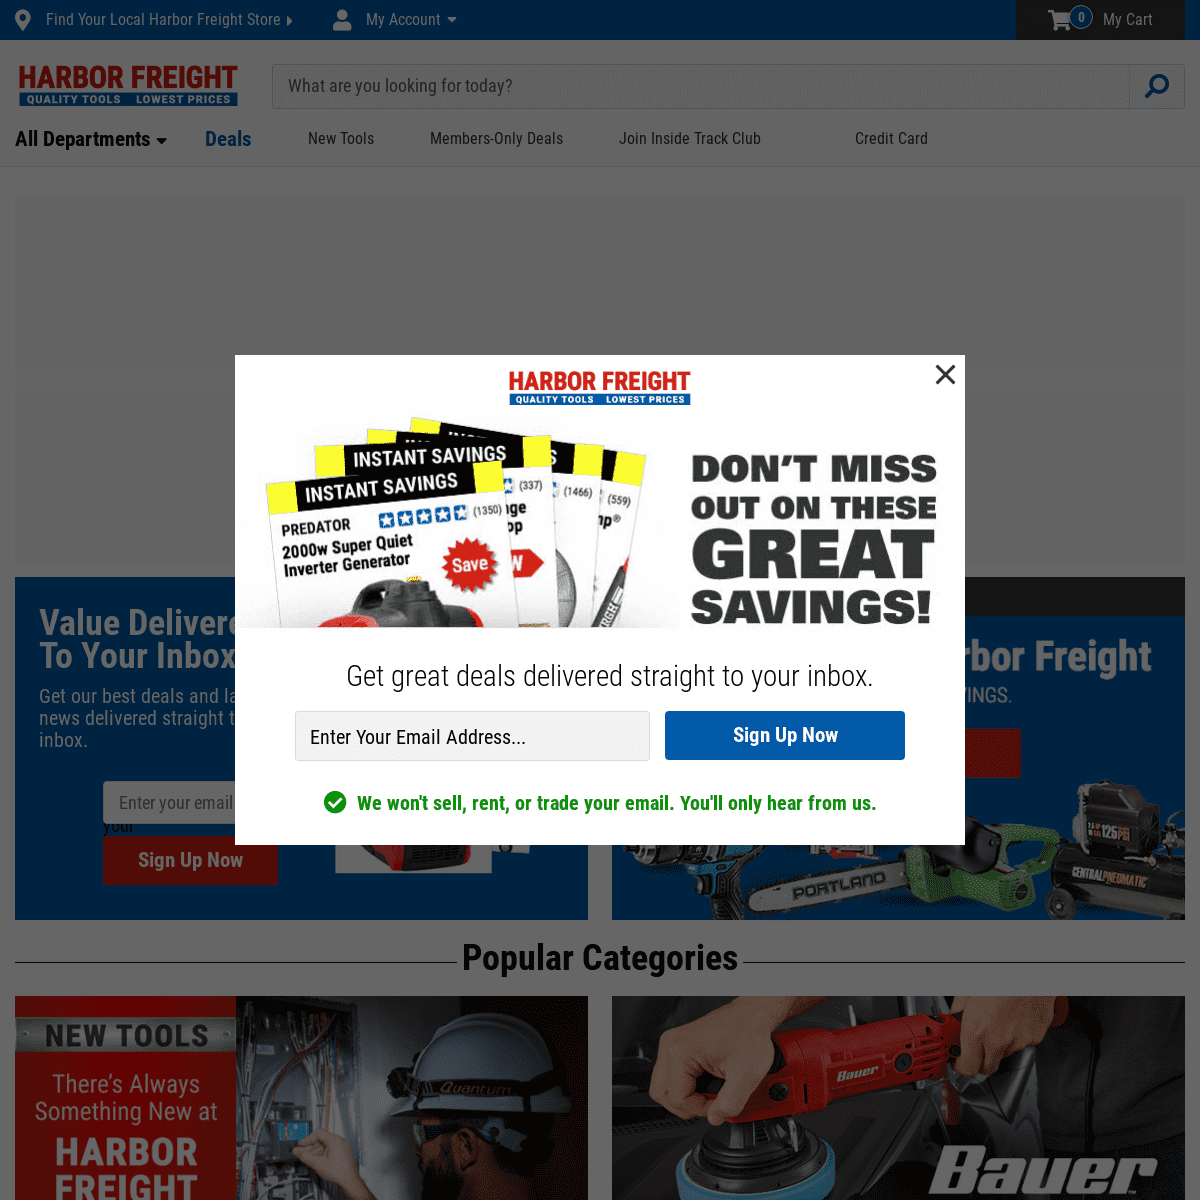 A complete backup of https://harborfreight.com